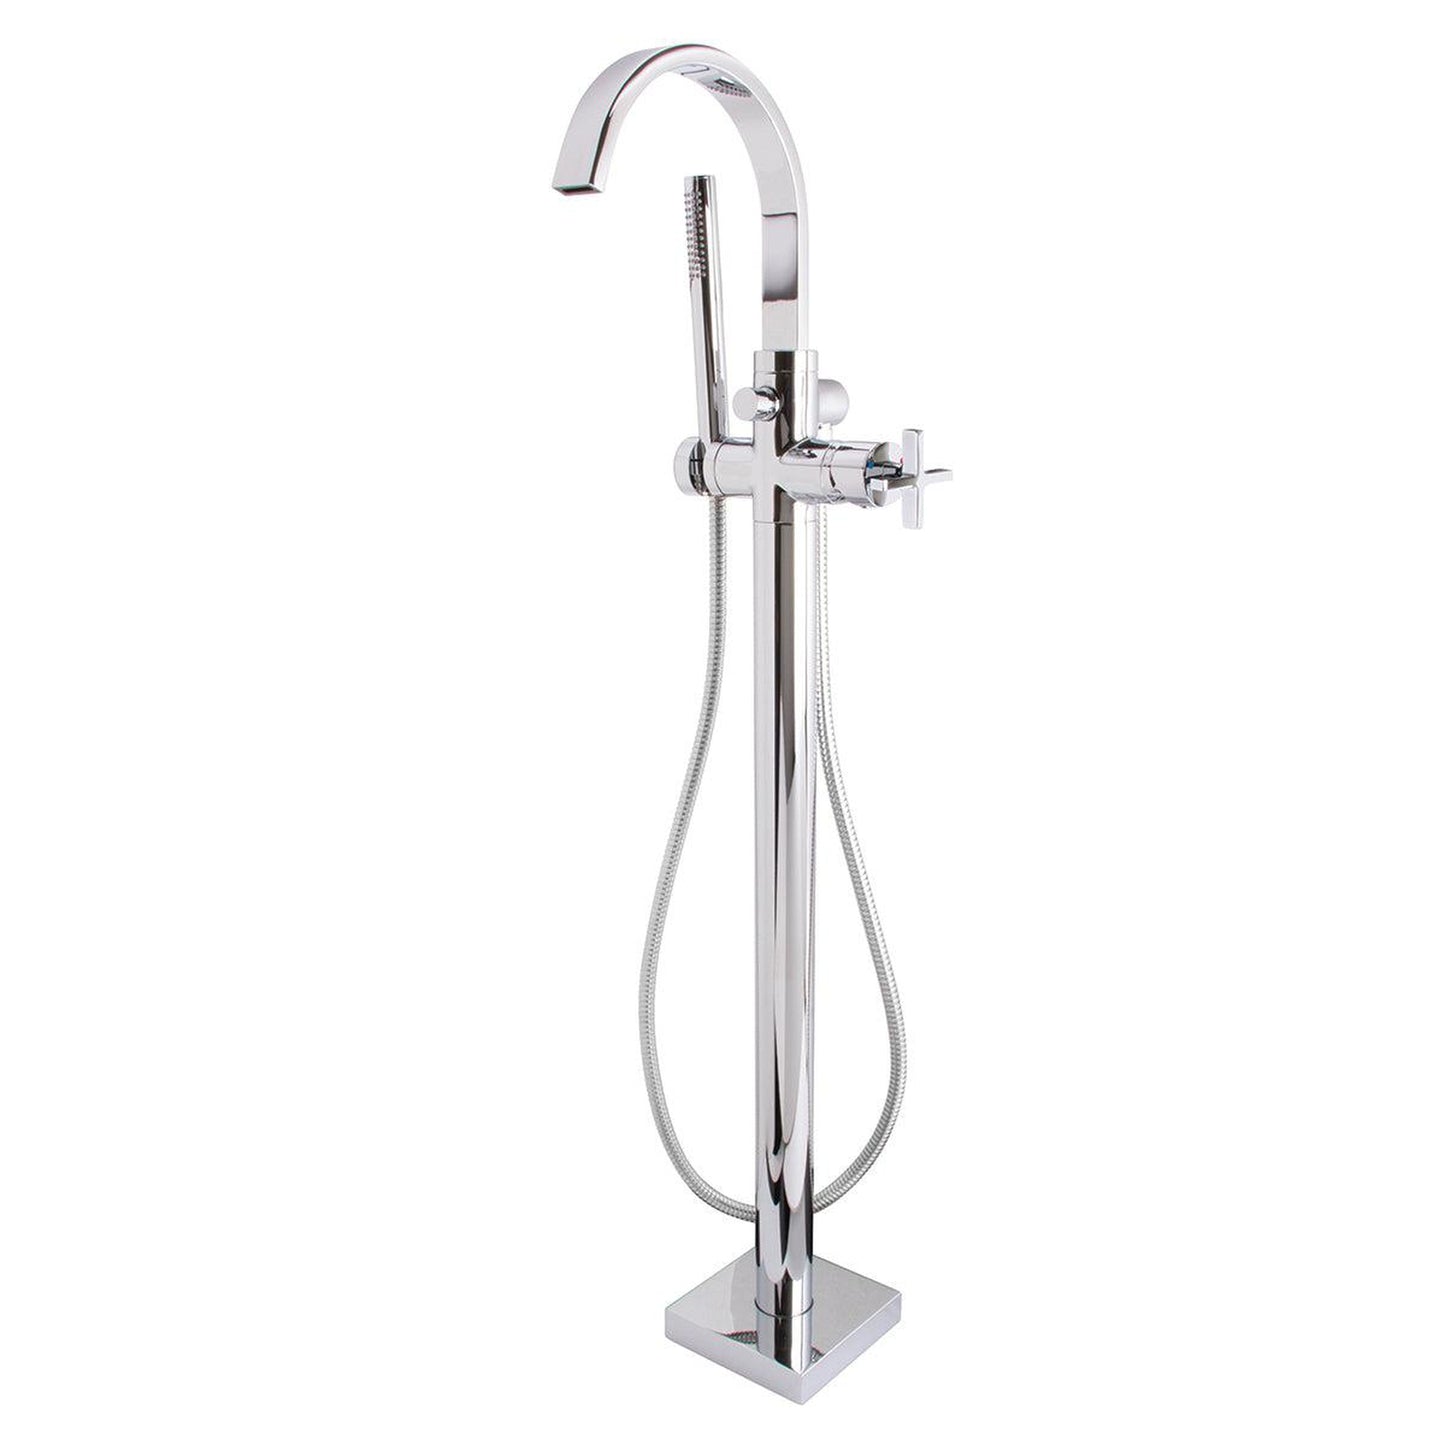 Speakman Lura Freestanding Roman Tub Faucet With Cross Handles in Polished Chrome Finish